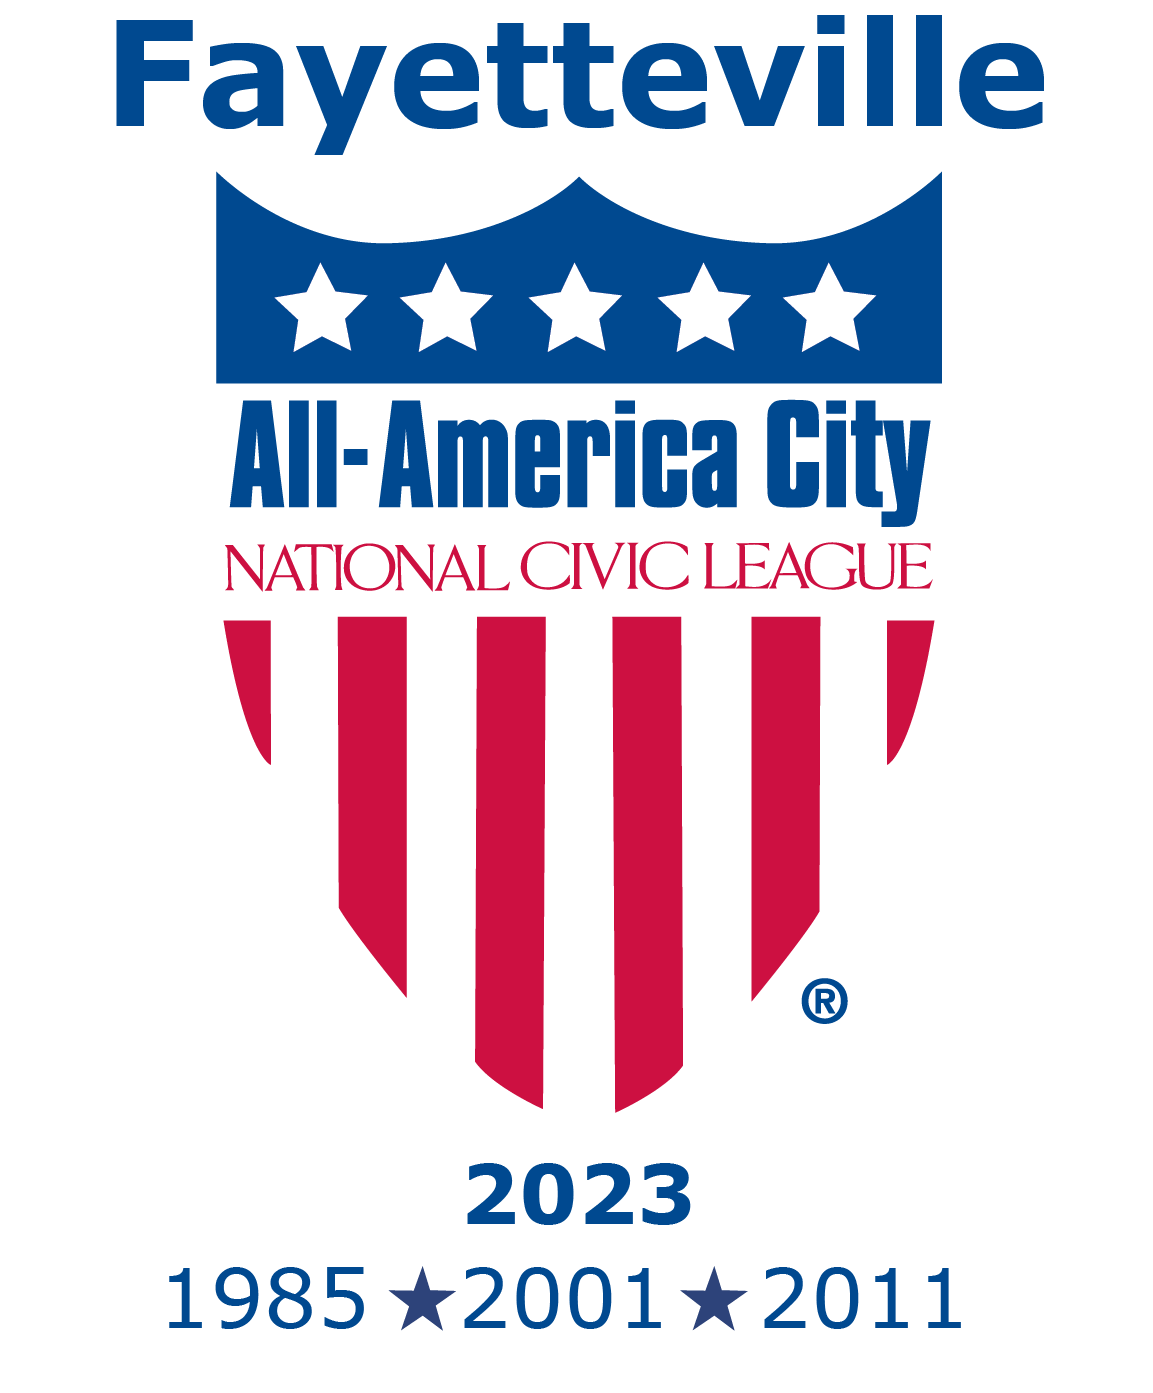 The City of Fayetteville was named an All America City by the National Civic League. The city has won three times previously.